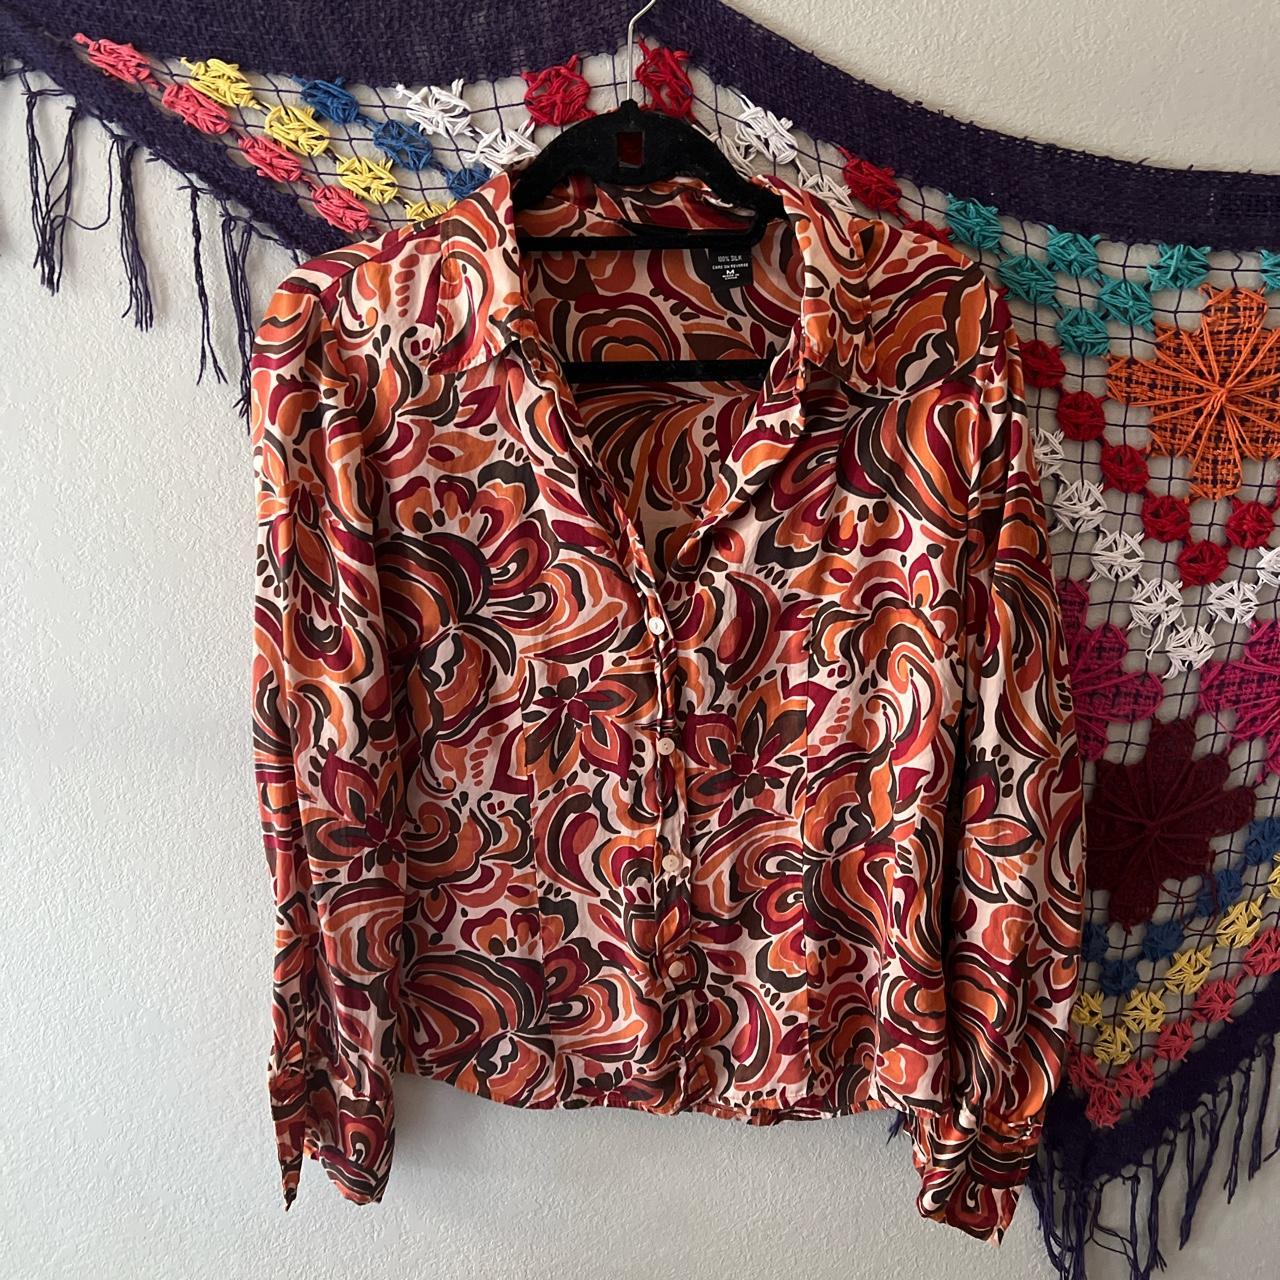 Product Image 2 - Groovy Silk Blouse
warm hued 70's